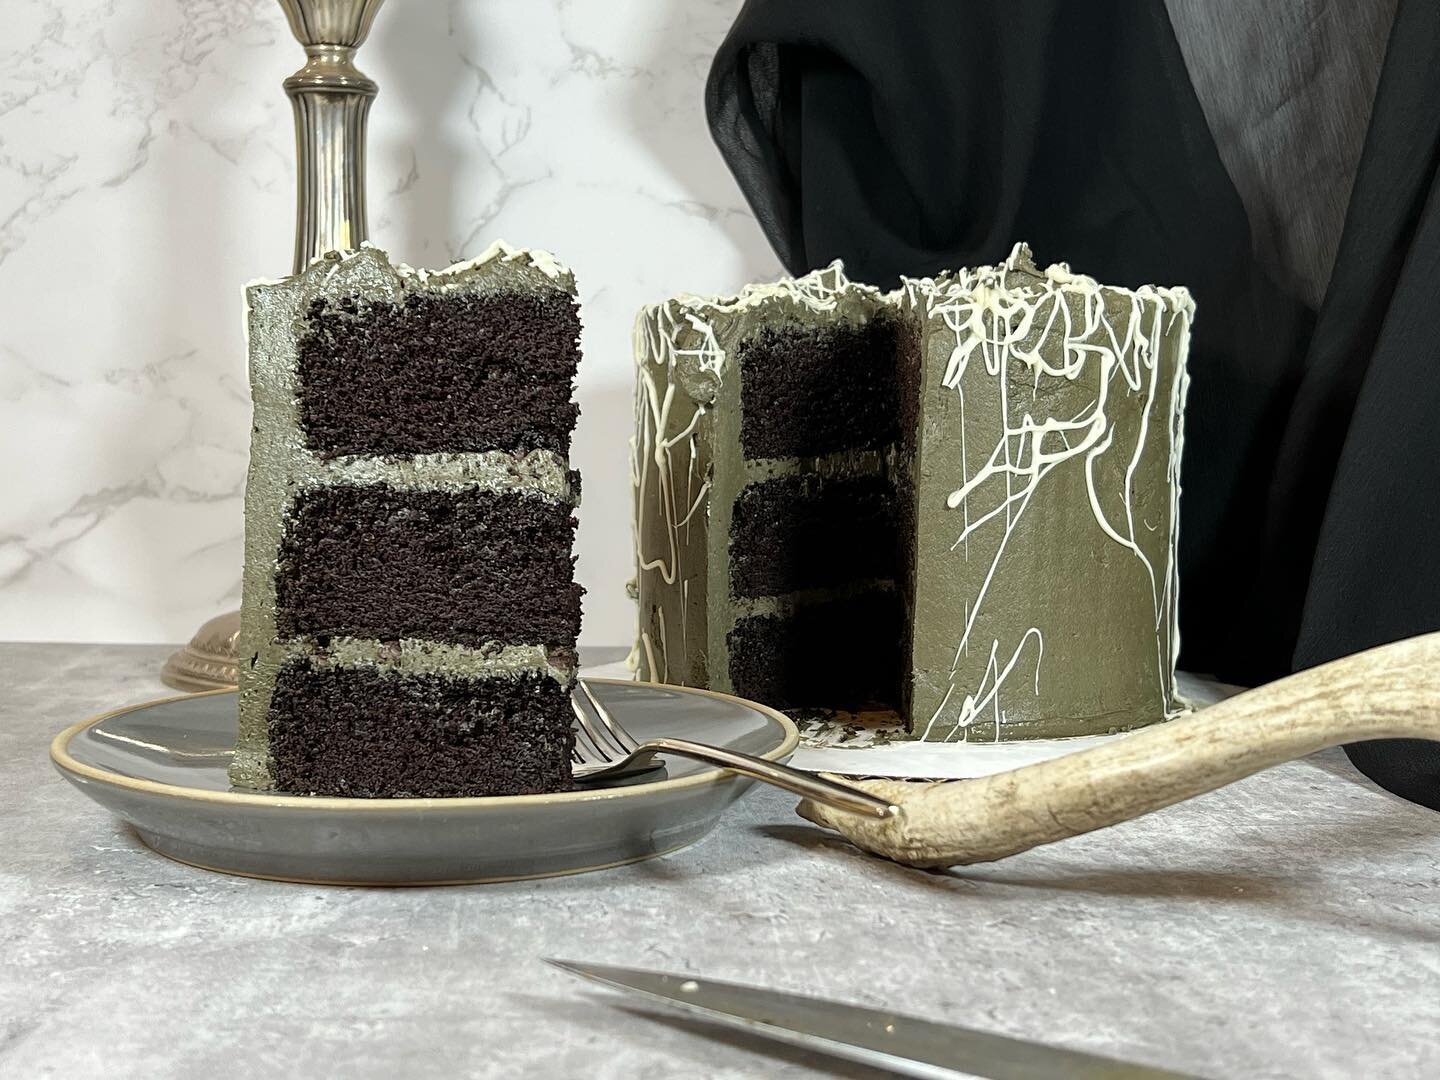 Happy Halloween 🪦 

Here is an spooky twist on my classic chocolate cake! With a little black food gel and some melted white chocolate I turned one of my favorite dessert recipes into a Halloween-inspired bake. 

What are you baking today?
 
Recipe 